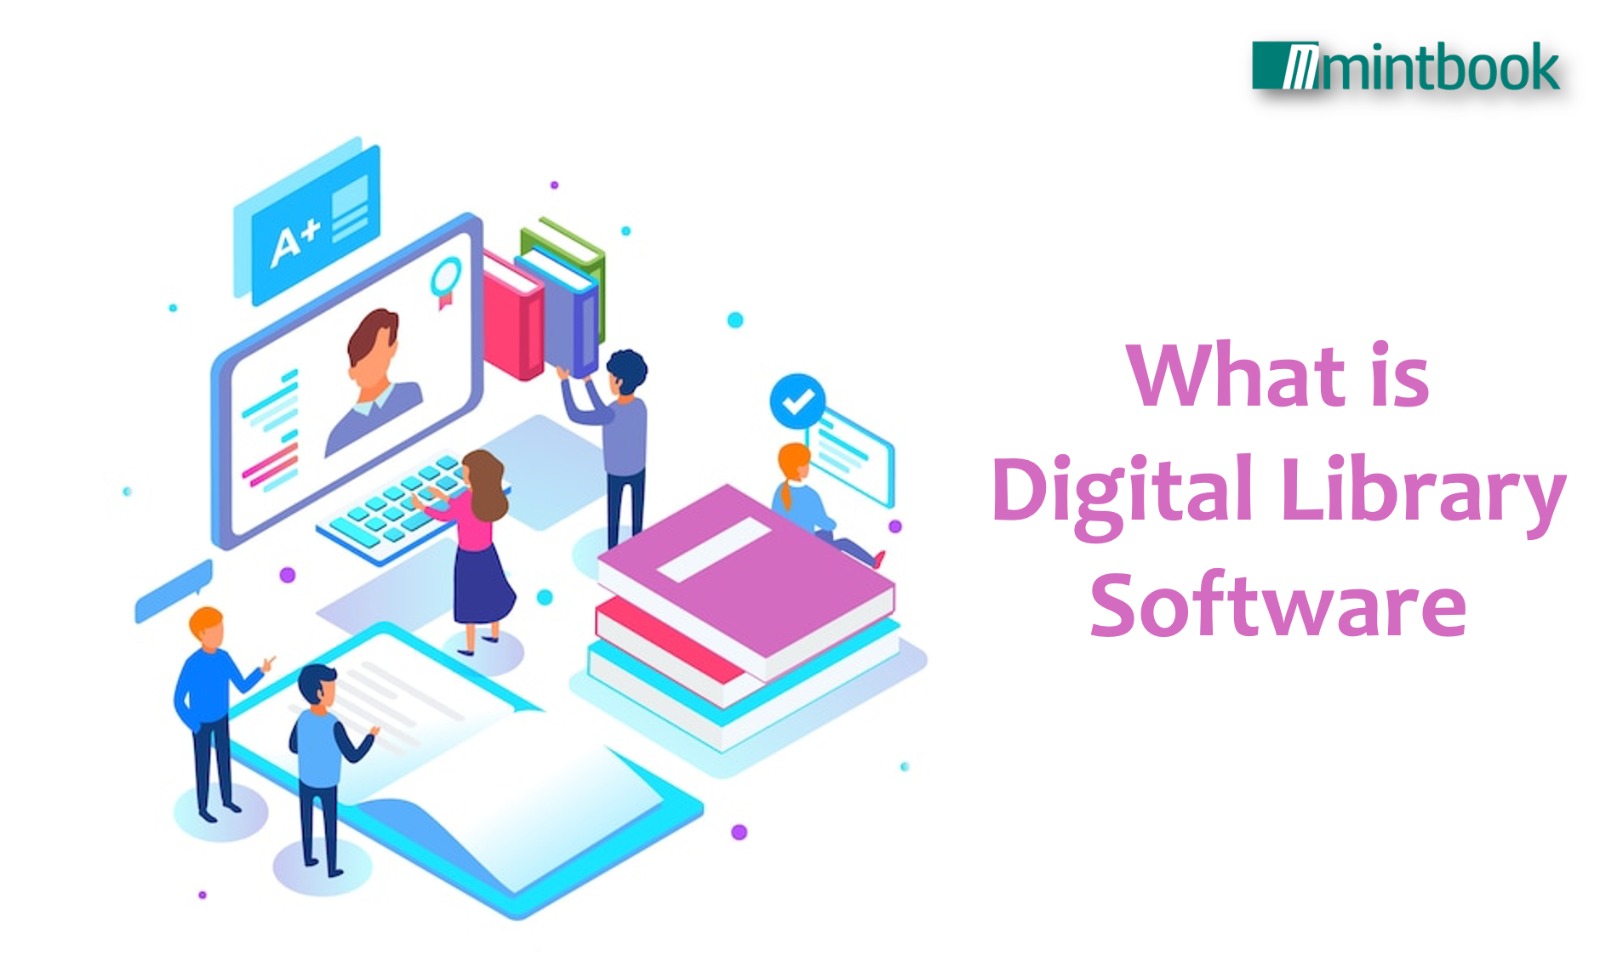 What is Digital Library Software